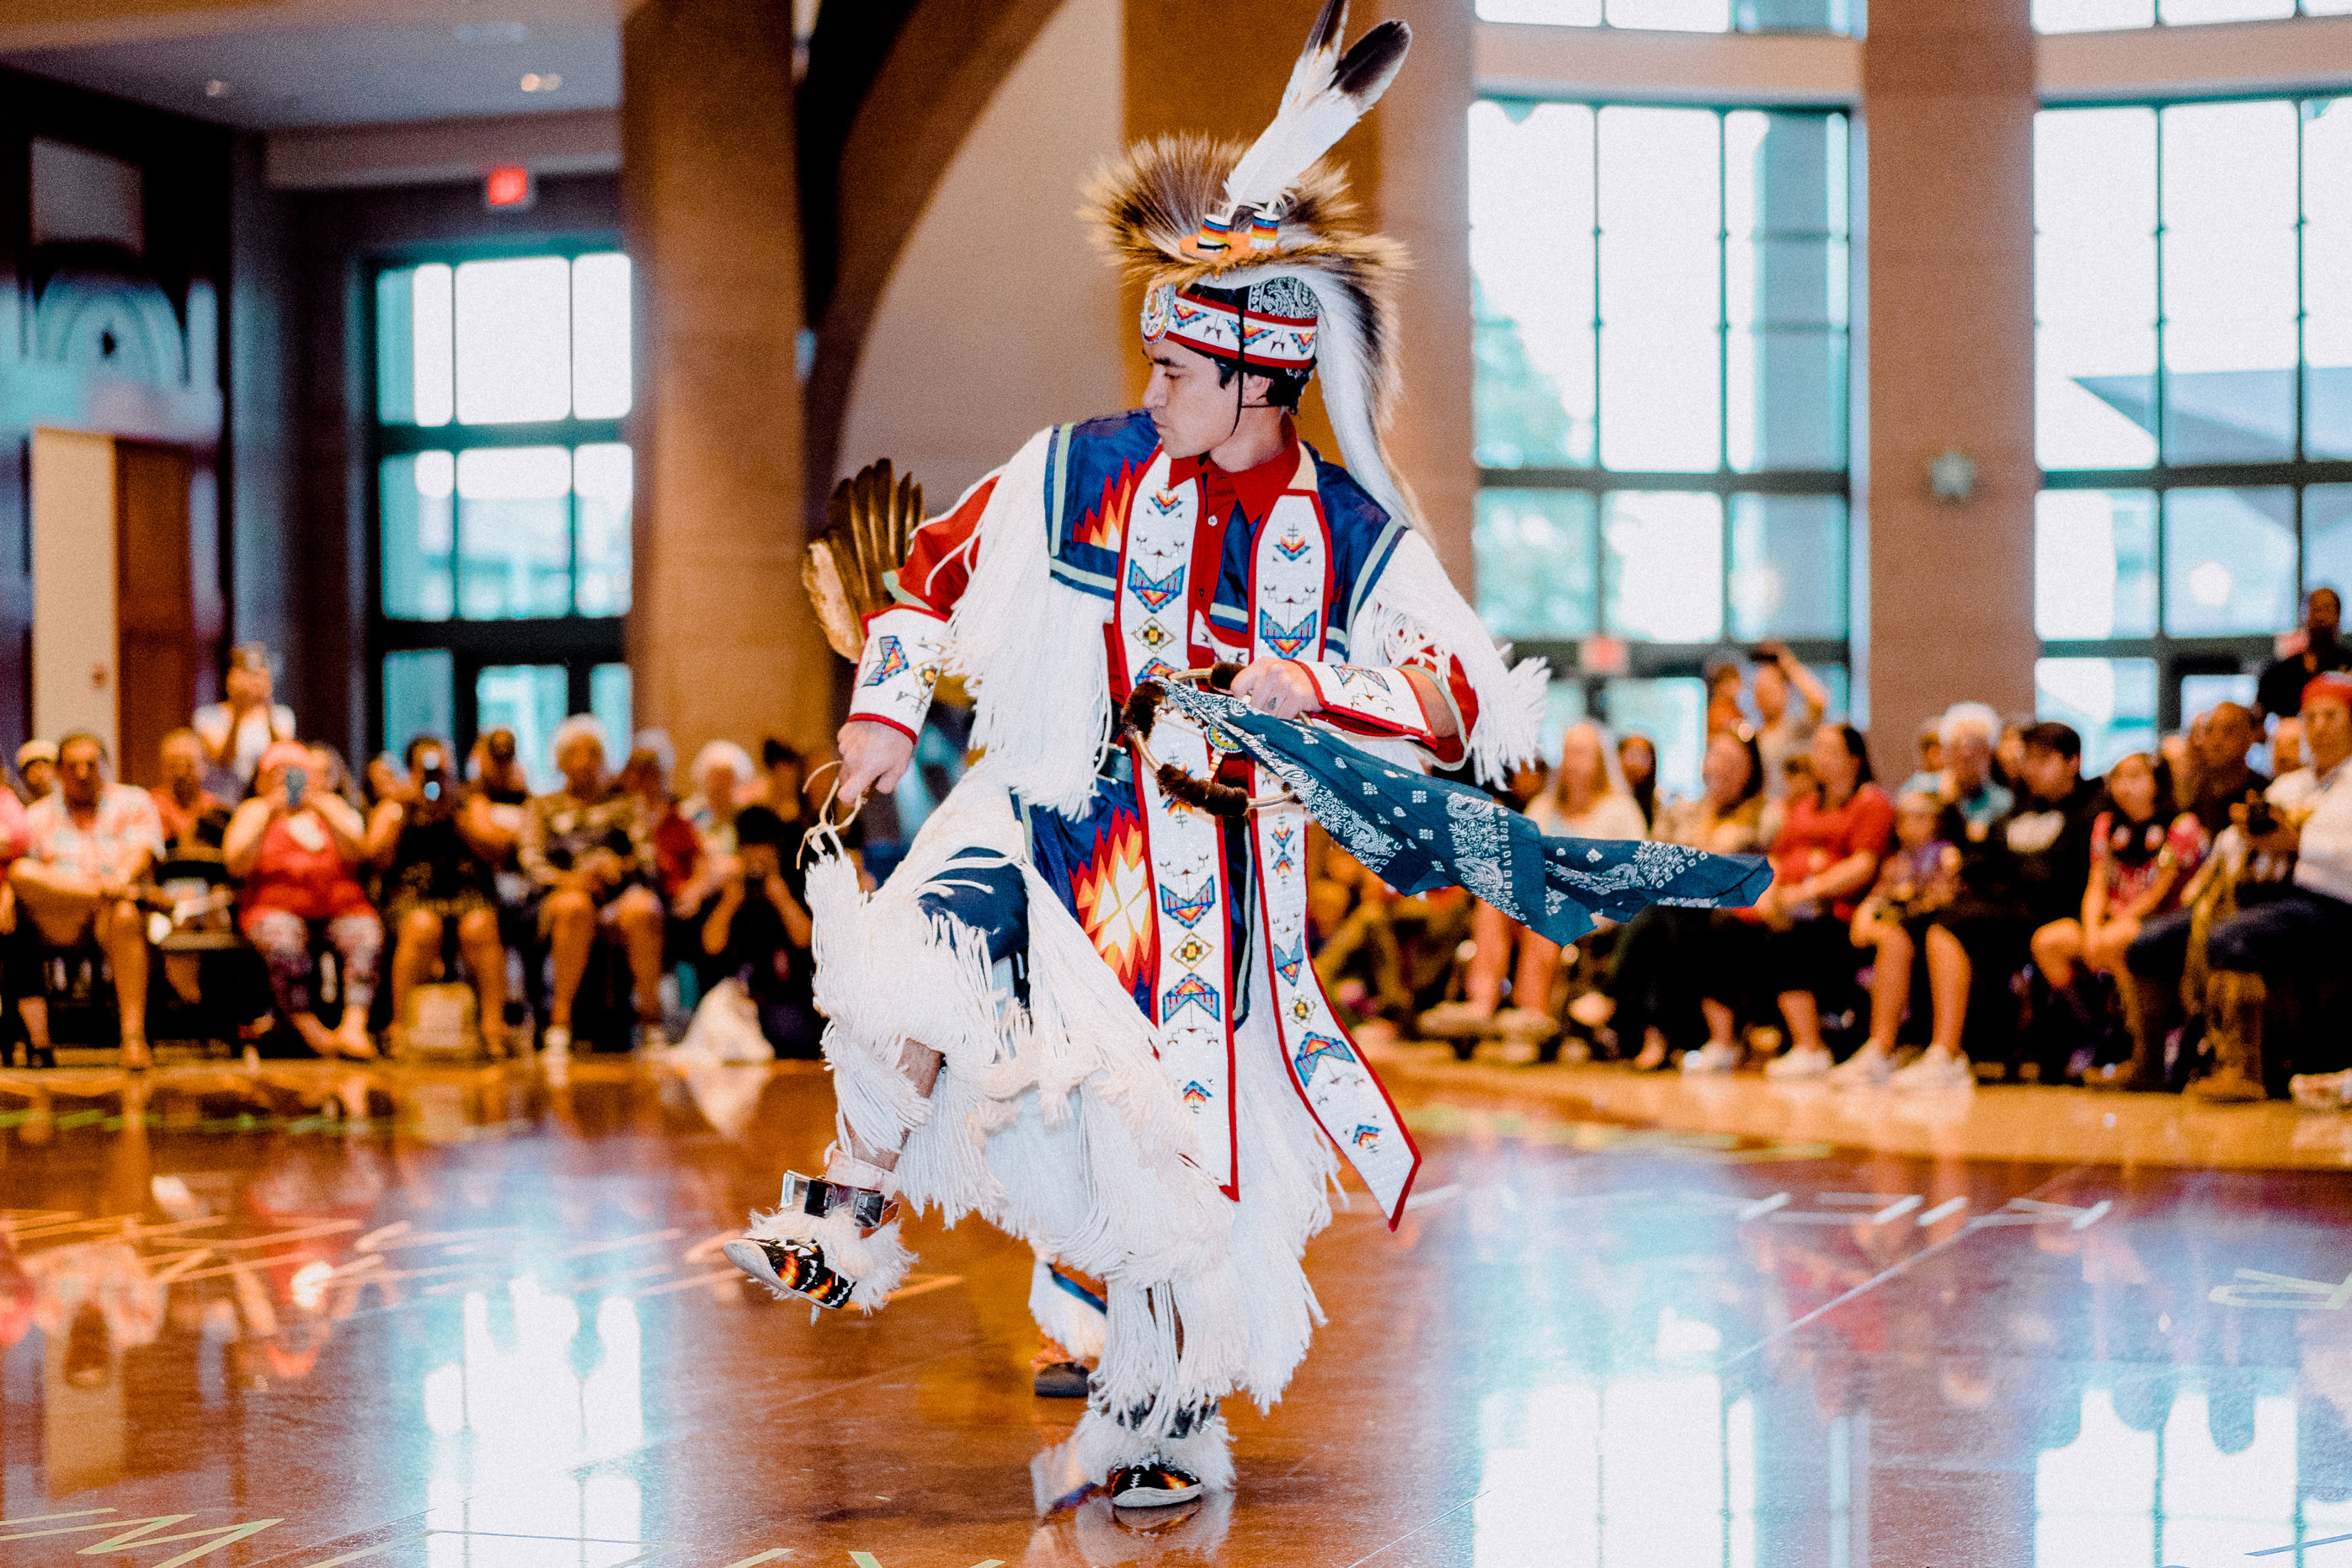 The 7th Annual American Indian Heritage Day celebration features traditional dancing and drumming performances by Great Promise for American Indians.